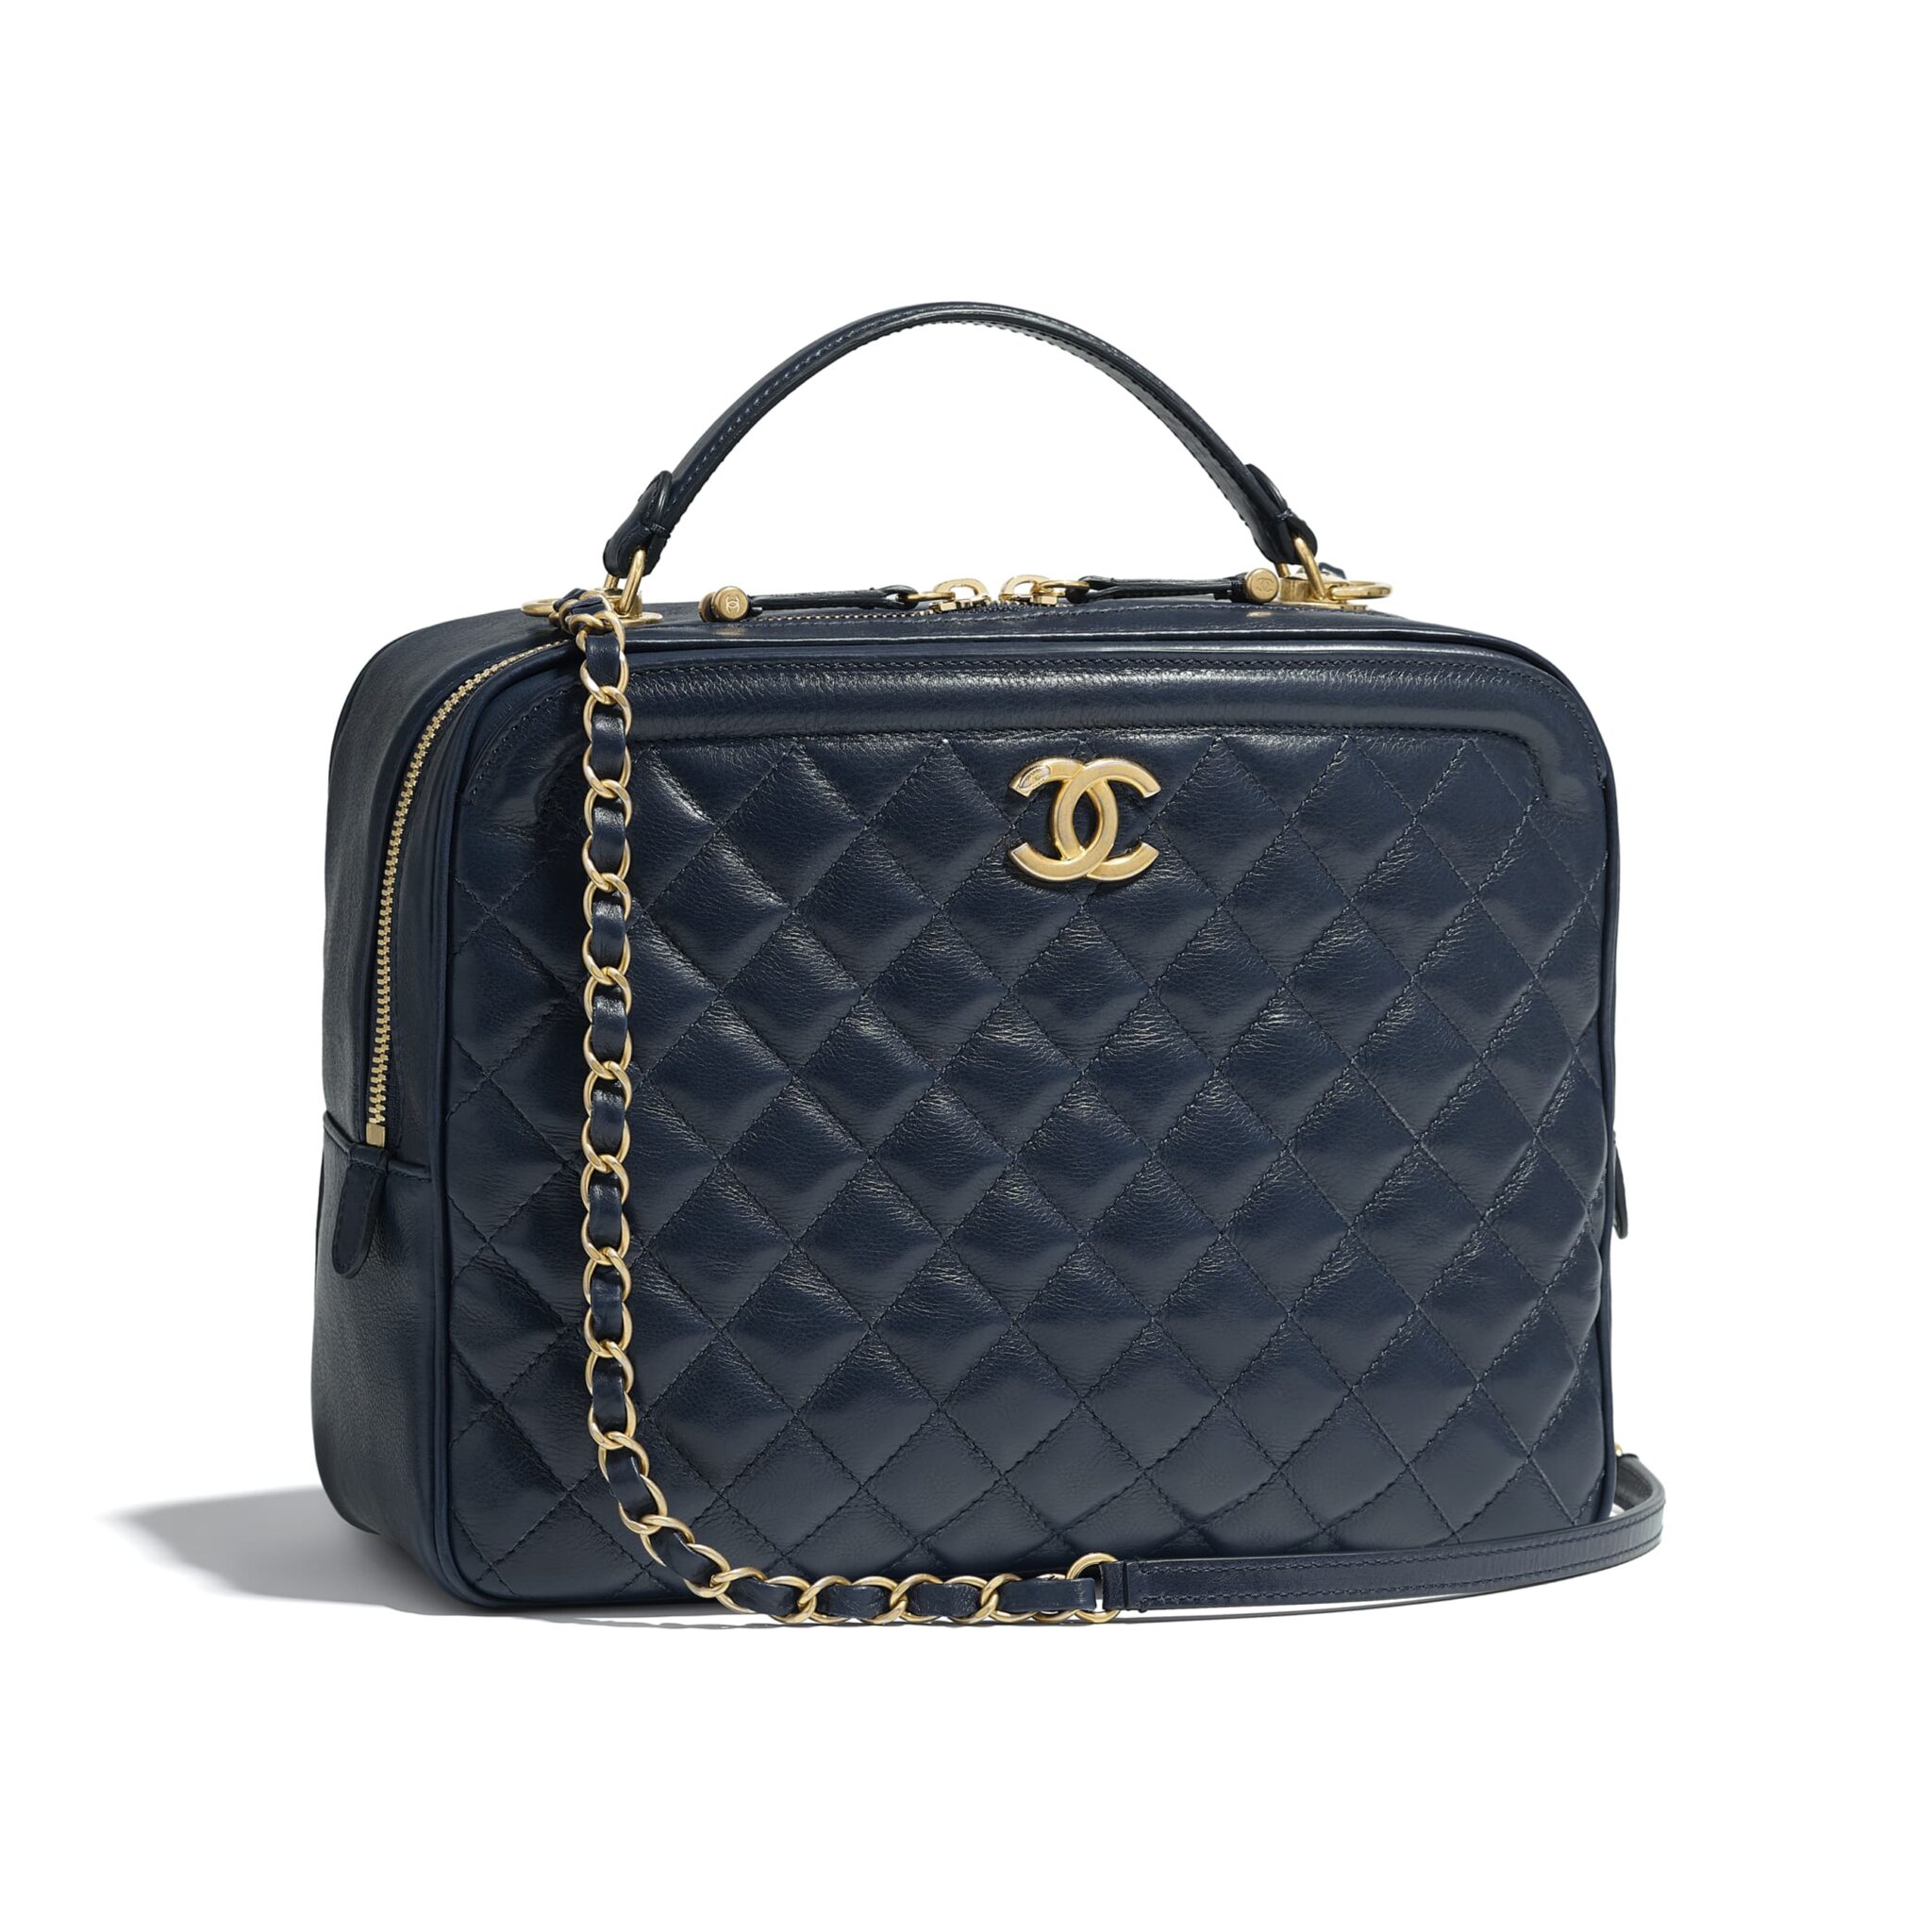 chanel vanity case navy blue leather